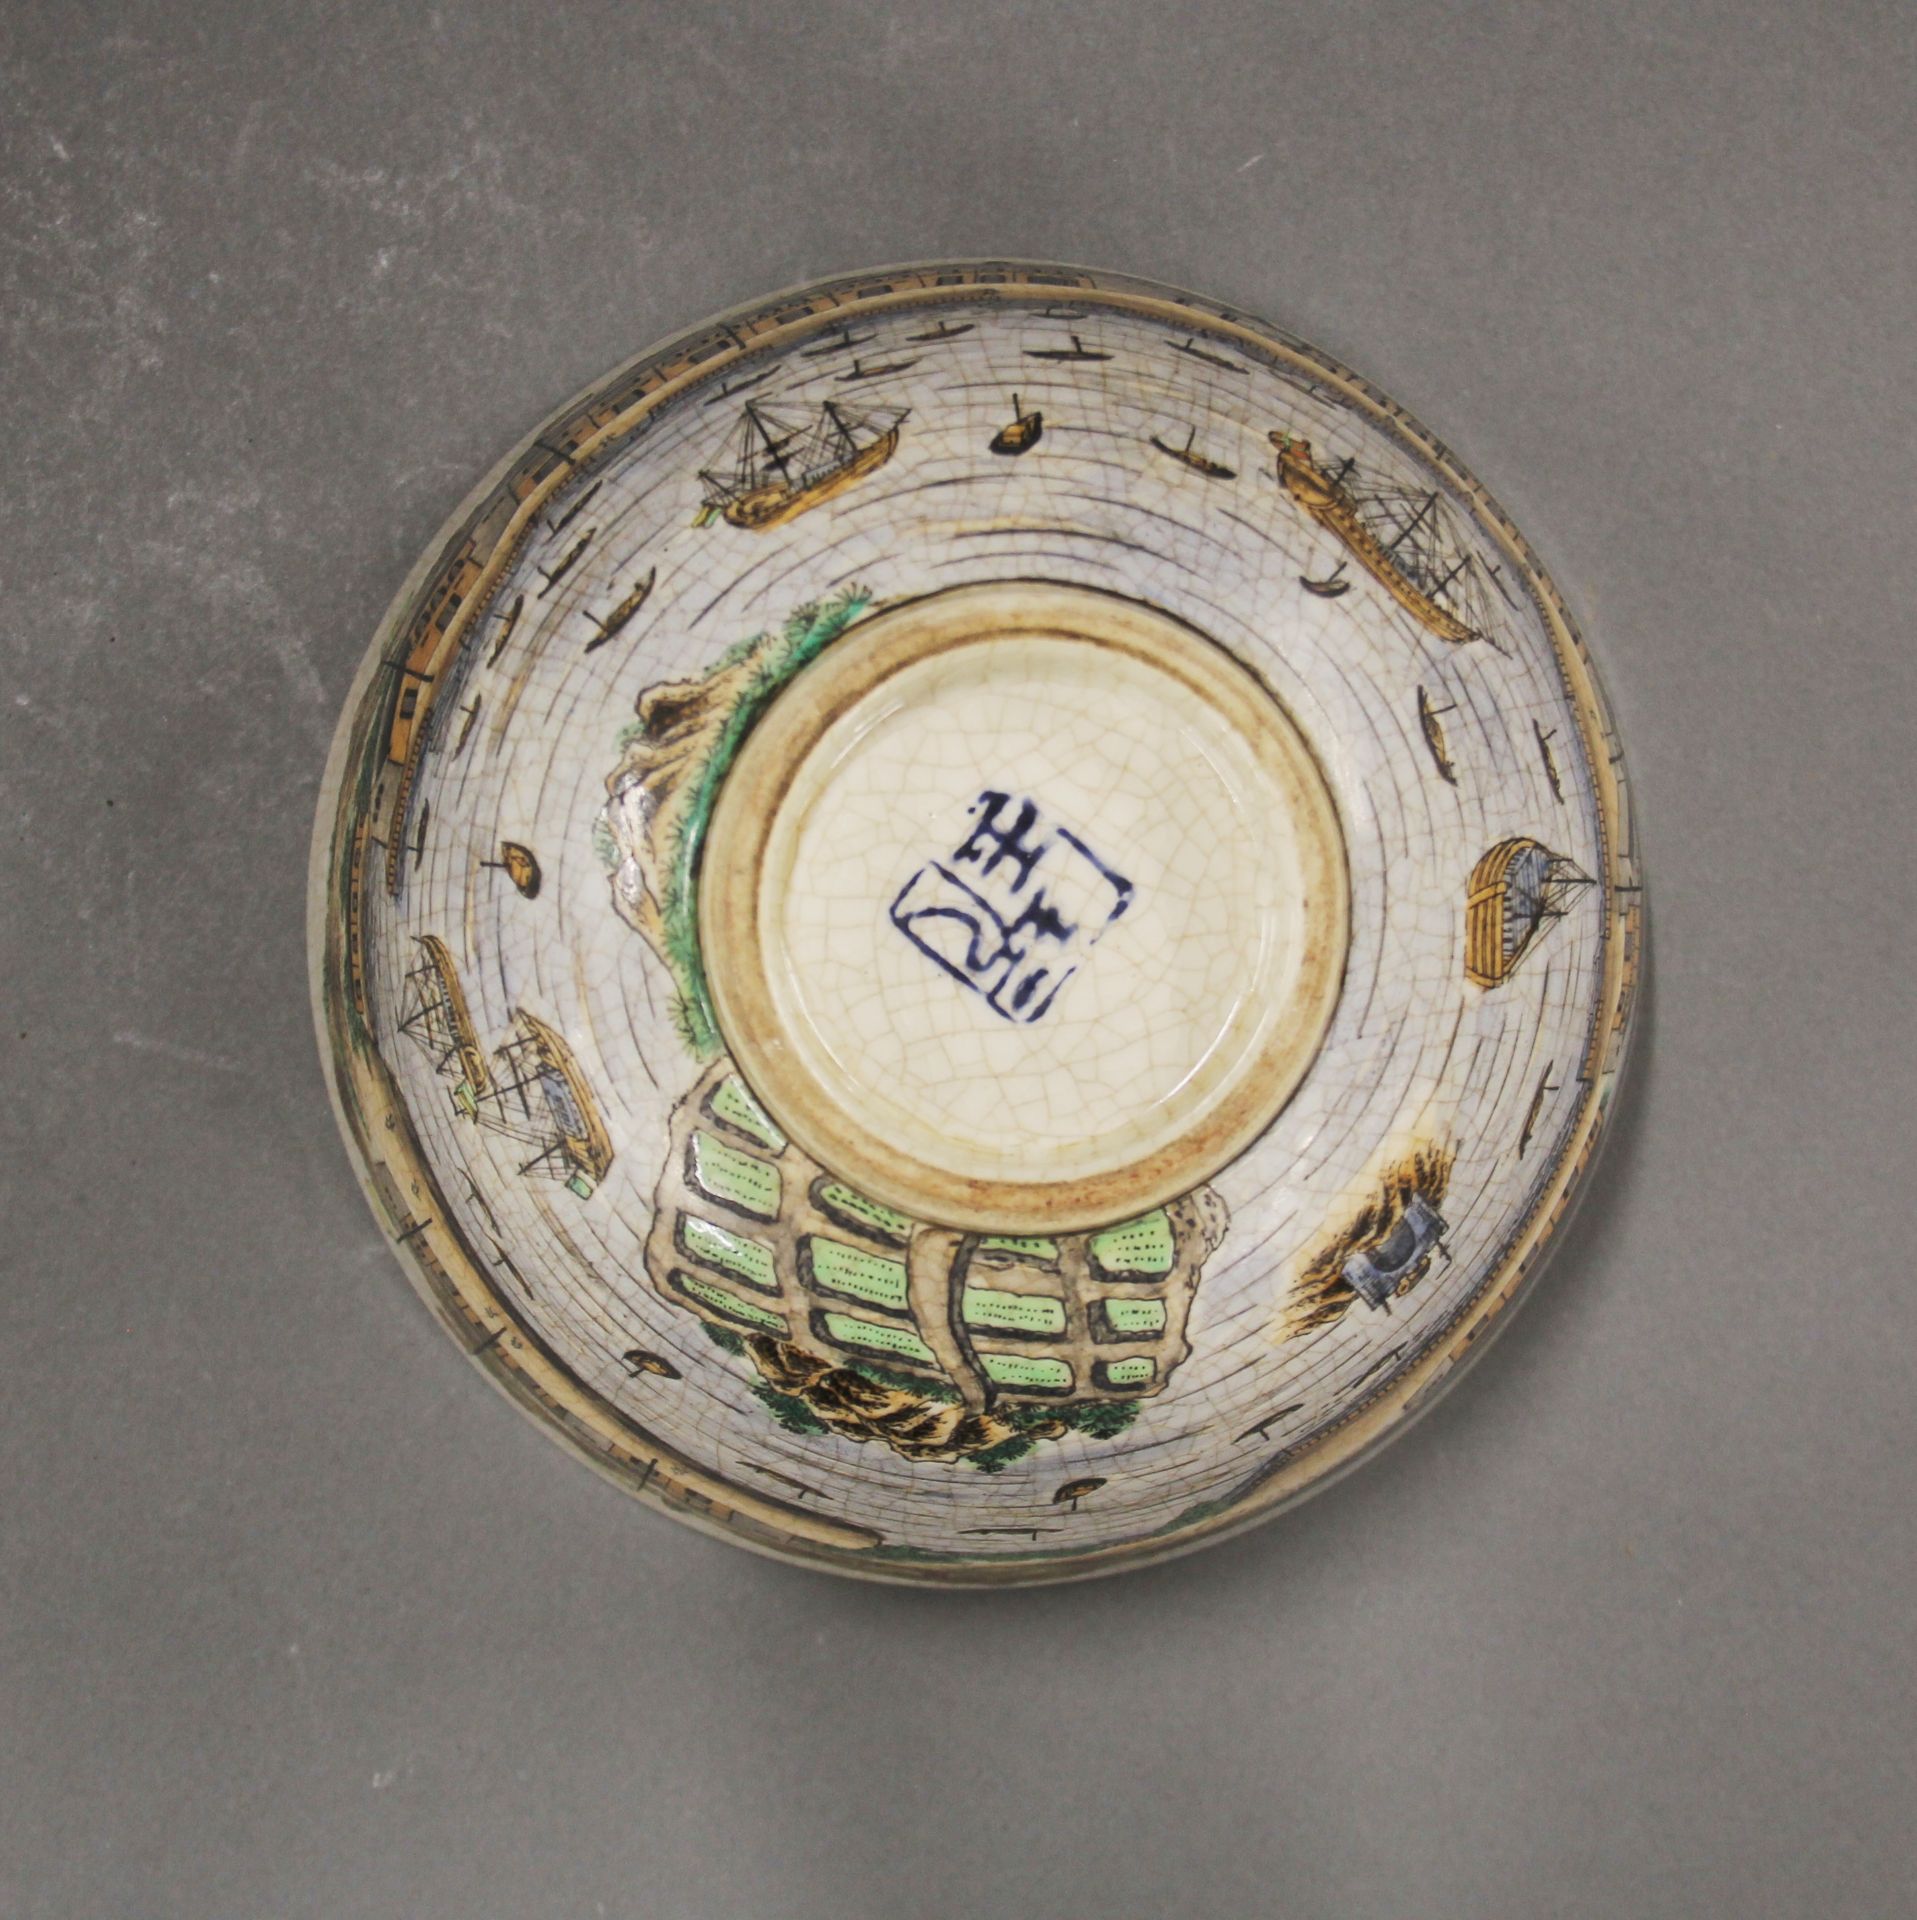 A 19thC relief decorated jug with a Chinese crackle glazed porcelain bowl depicting shipping - Image 5 of 6